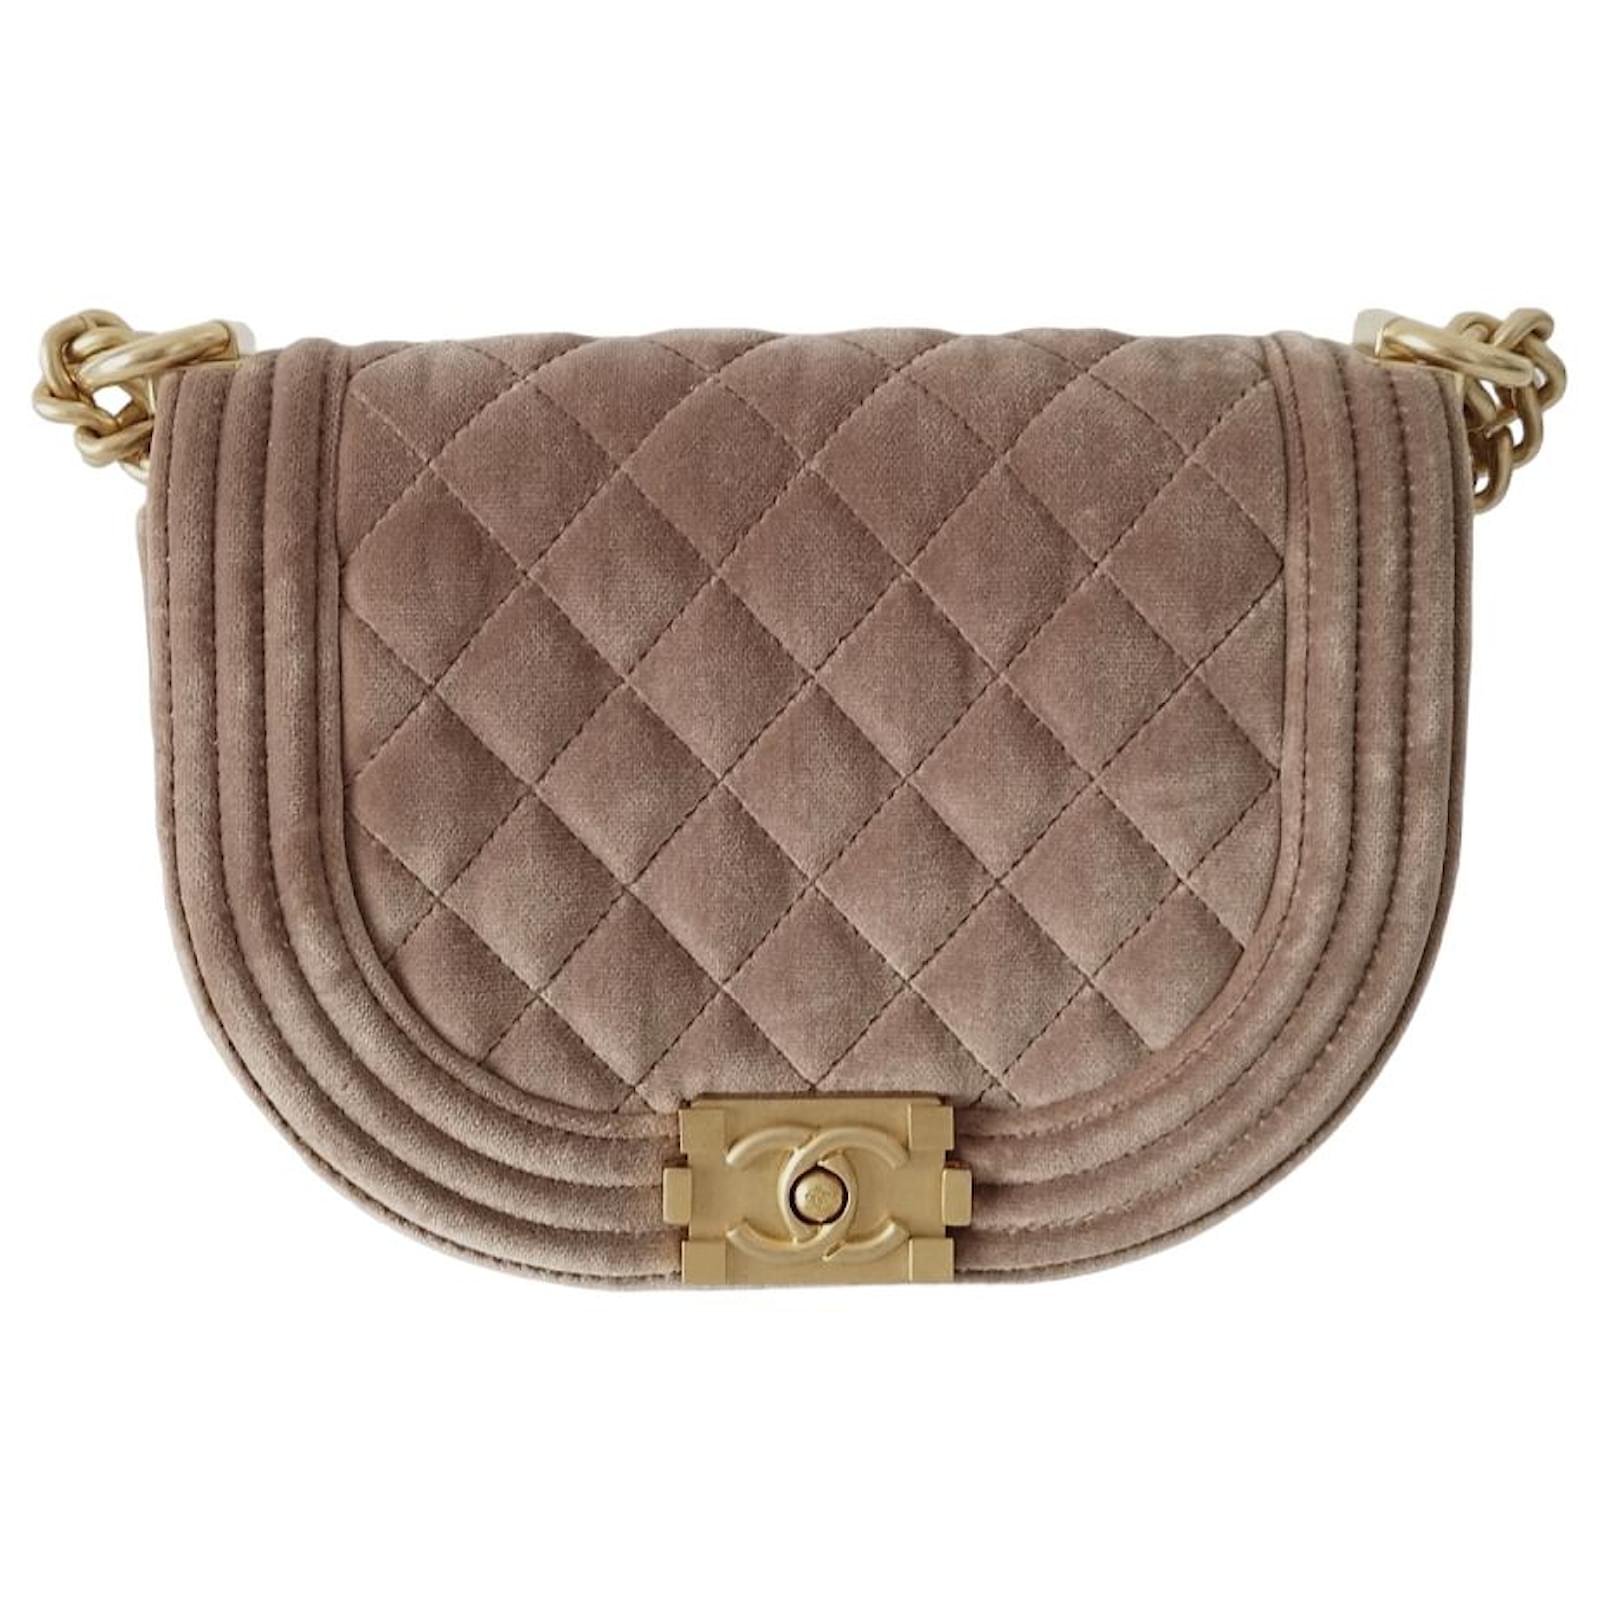 Chanel Boy Messenger Curve bag in gold suede calf leather/khaki